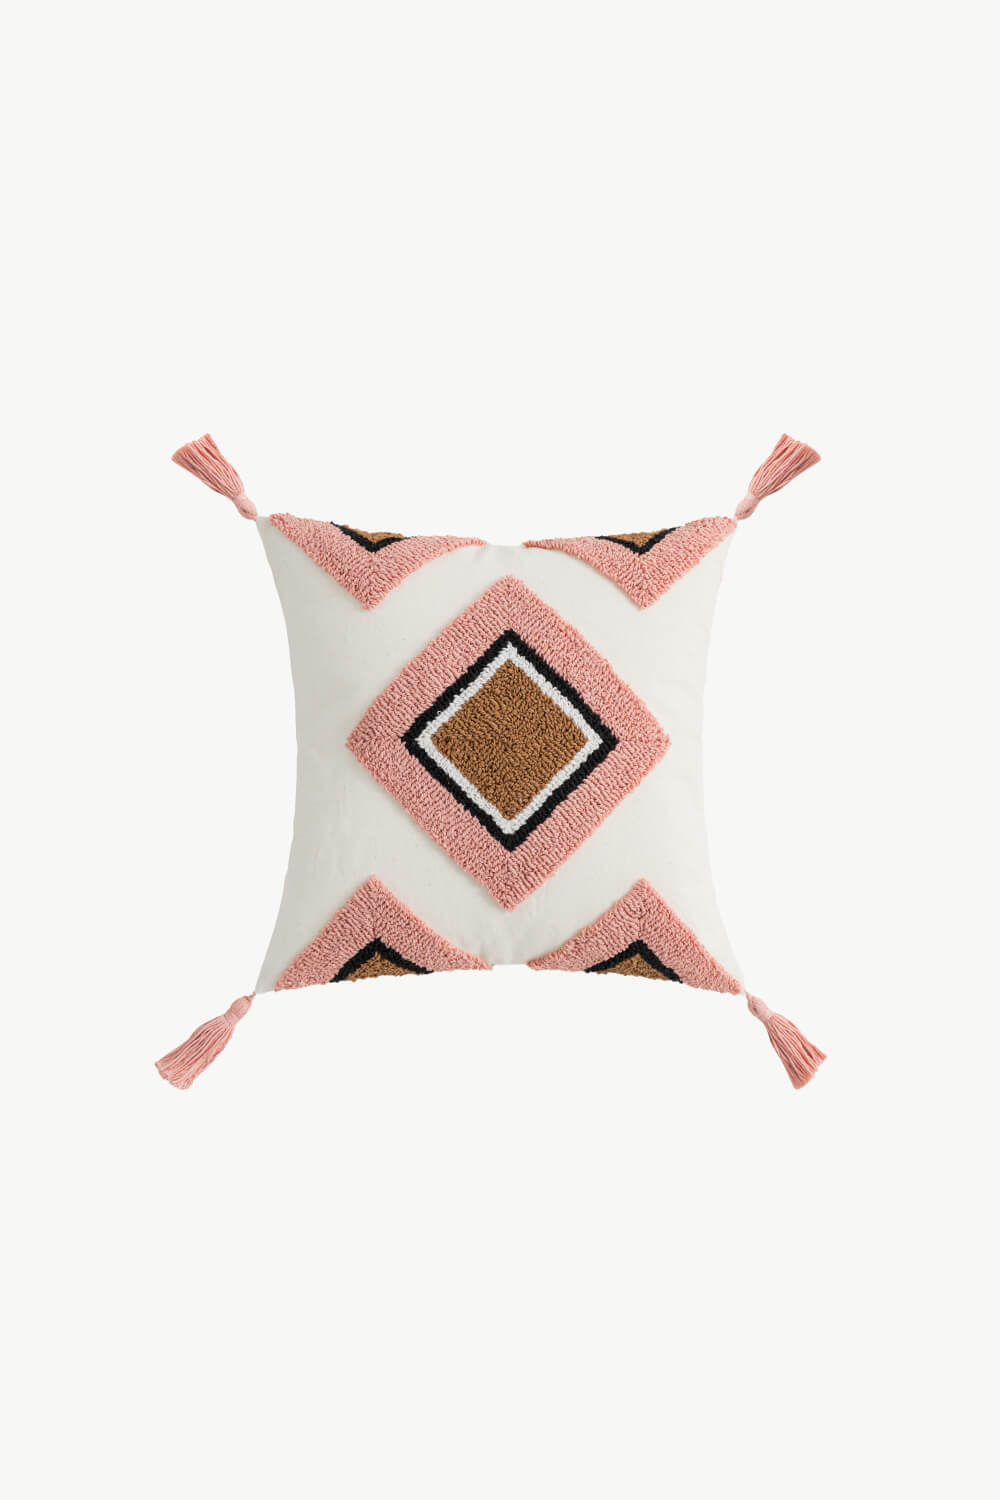 Buy 4 Styles Geometric Graphic Tassel Pillow Cover by Faz